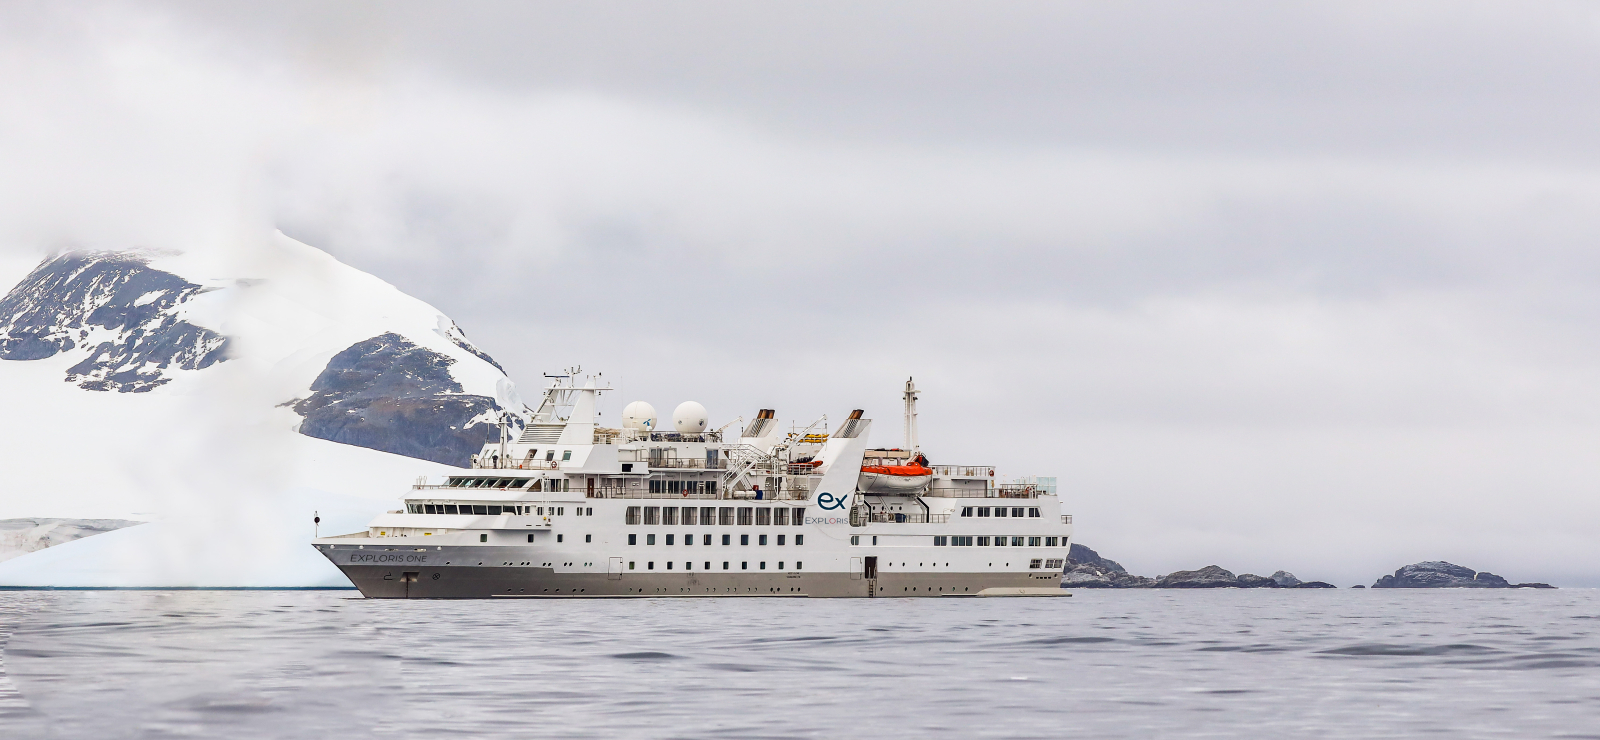 Exploris will launch a new expedition cruise brand next year with the former Silver Explorer (Image at LateCruiseNews.com - August 2022)